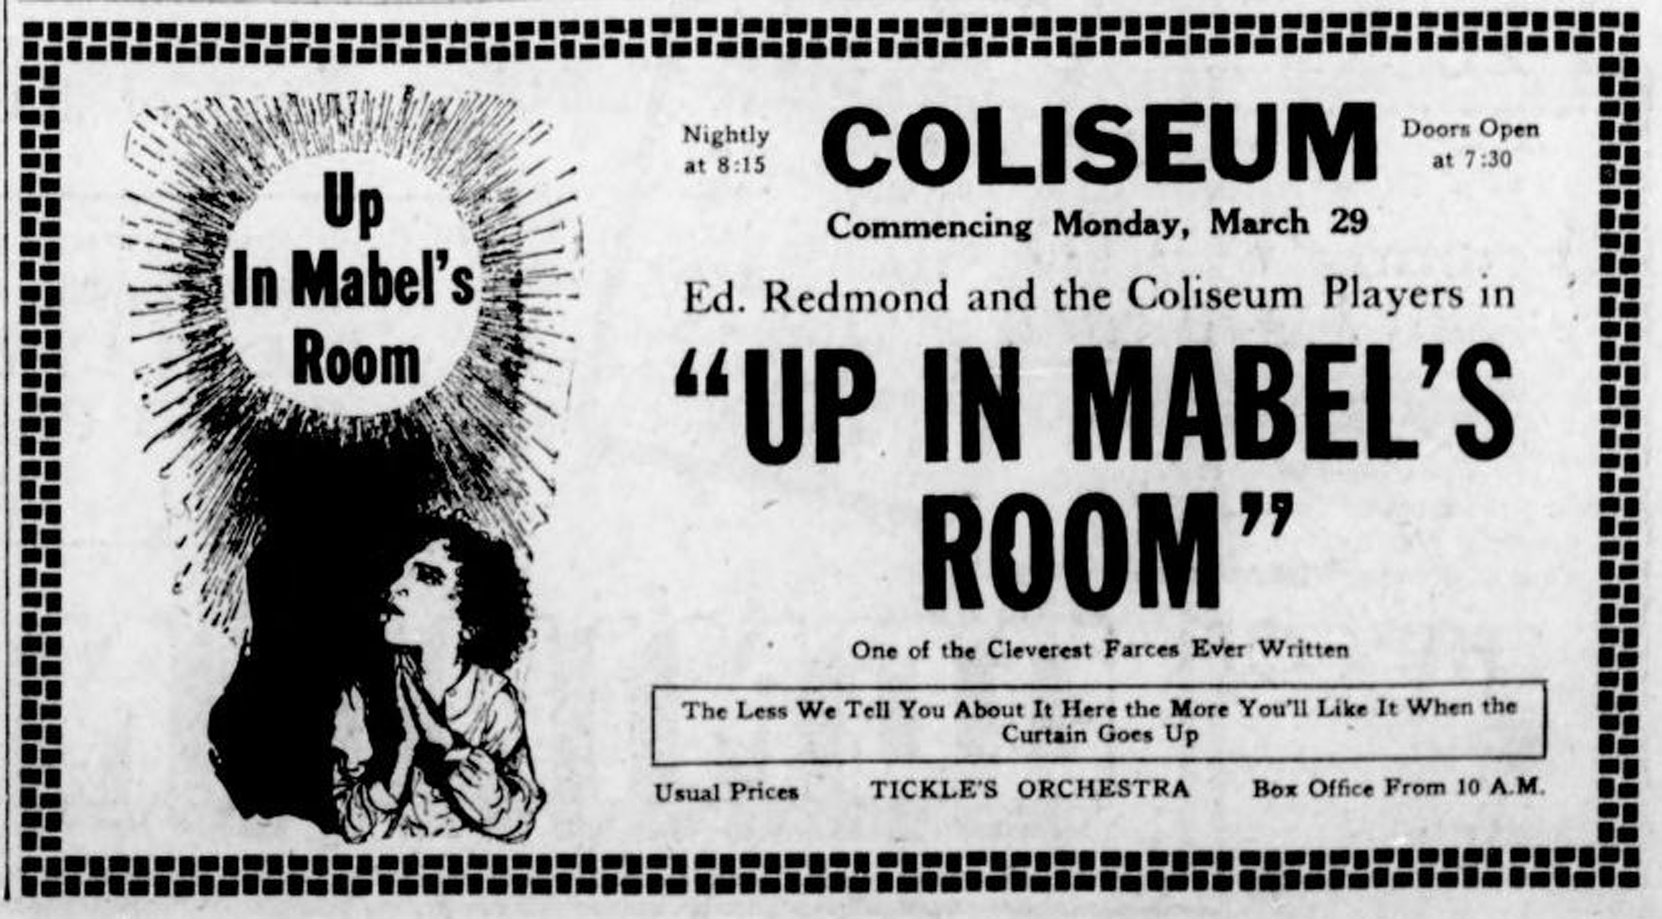 1926 advertisement for the Coliseum Theatre (originally the Kinemacolor Theatre), 1600 Government Street. This advertisement is for a live theatre production of Up In Mabel's Room. (Victoria Online Sightseeing Tours collection)